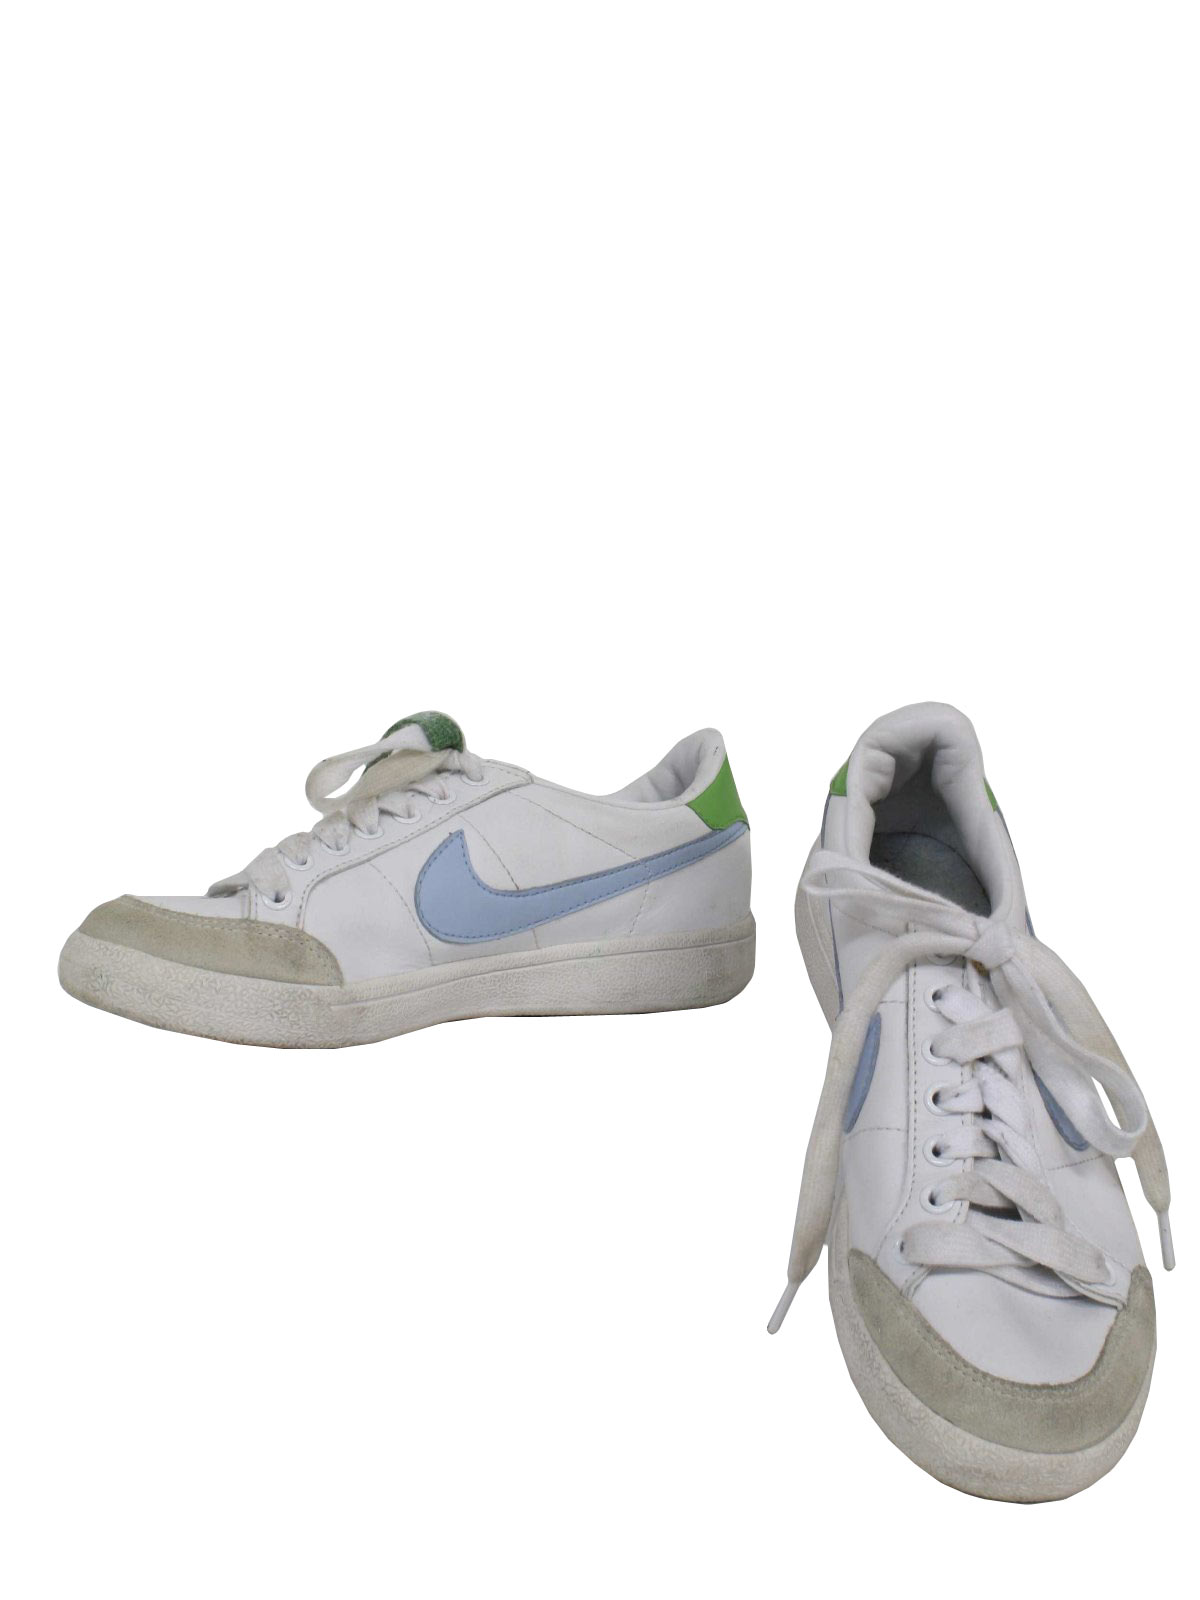 old nike tennis shoes